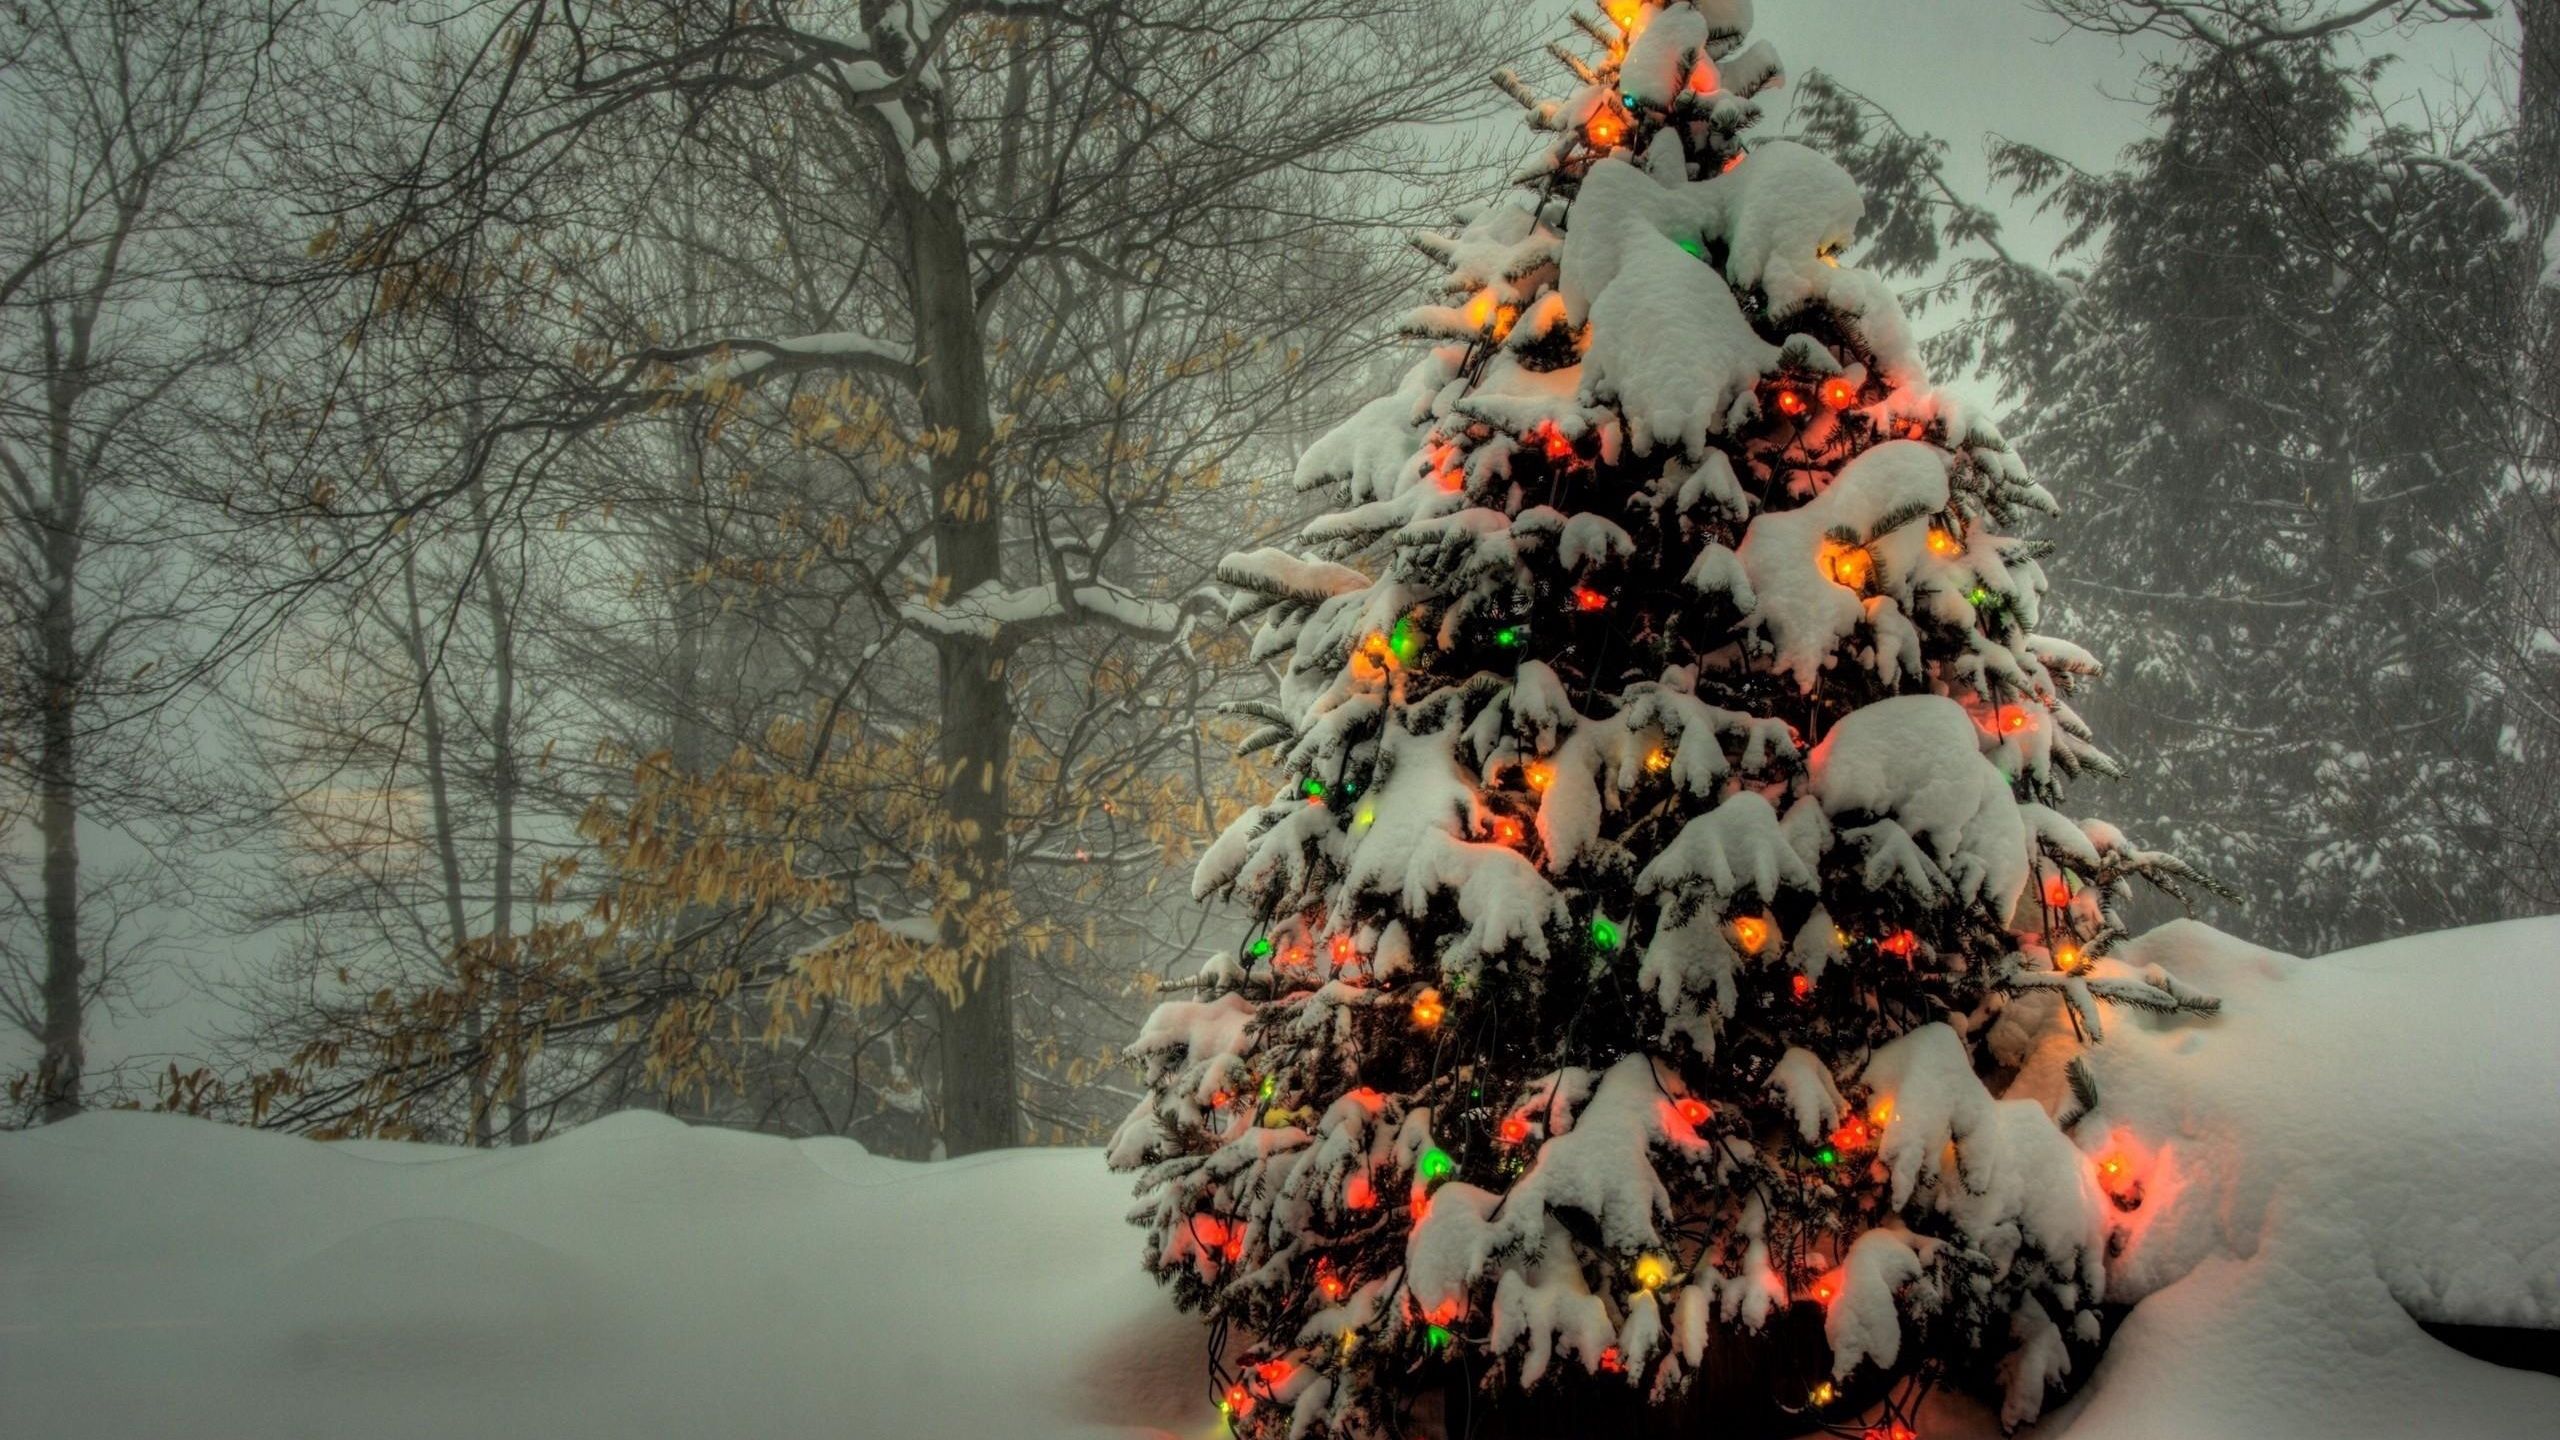 Download wallpaper 2560x1440 tree, garland, new year, christmas, trees, snow, winter, holiday widescreen 16:9 HD background